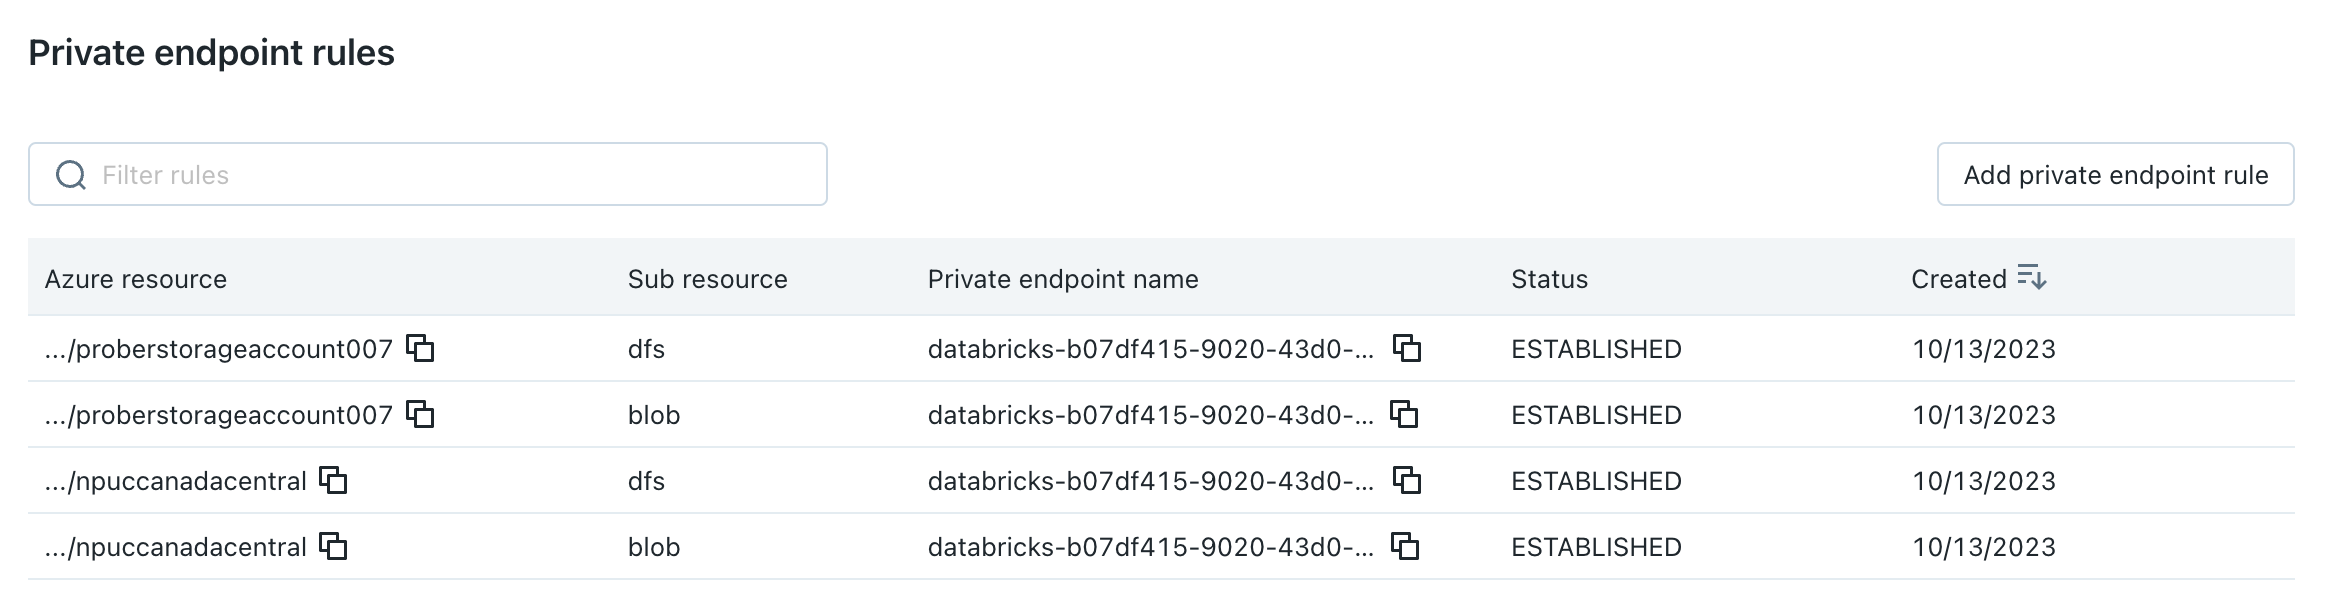 Private endpoint list